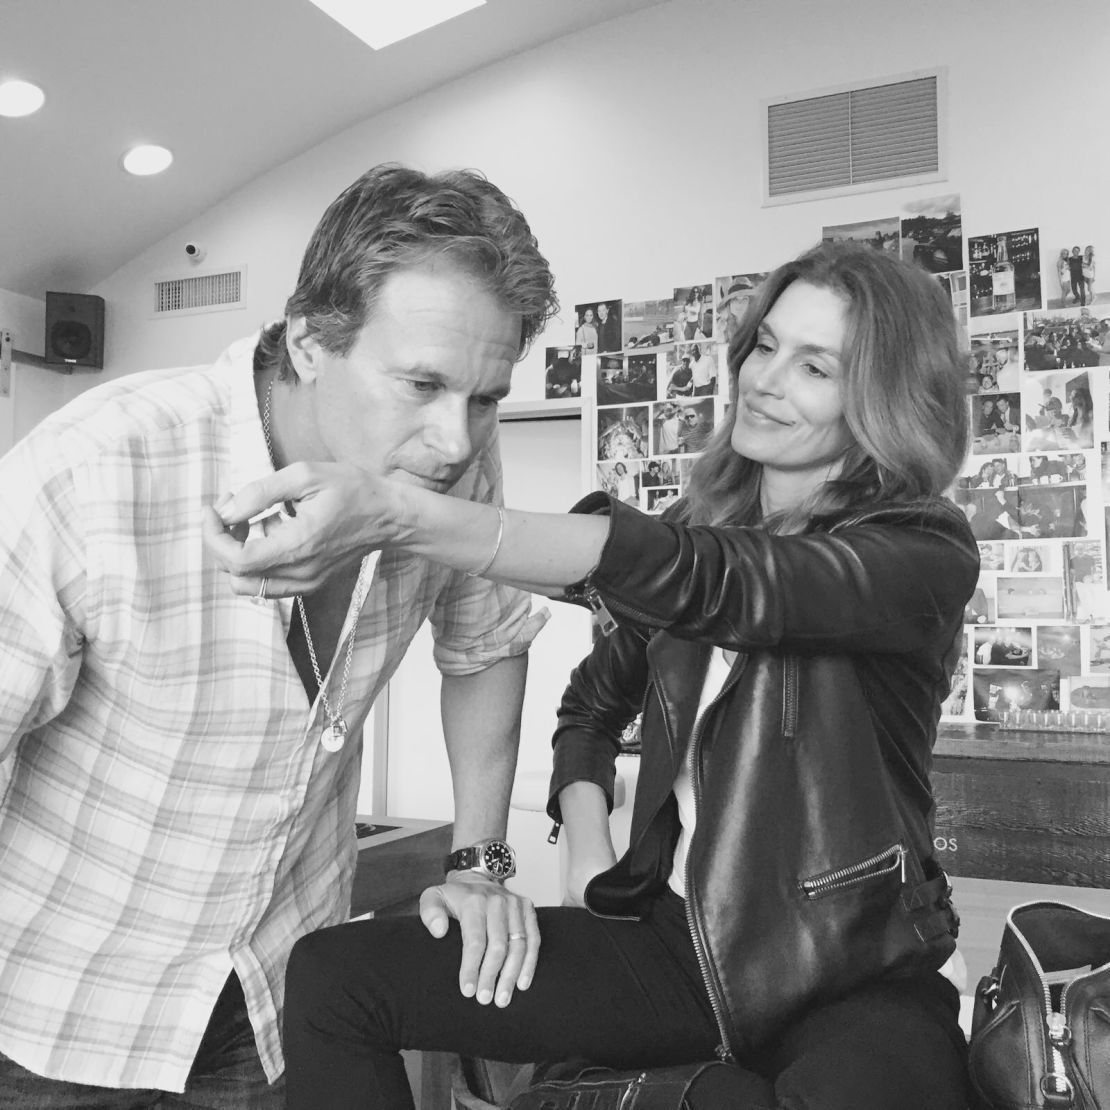 Cindy Crawford's husband Rande Gerber gifted the model a bespoke fragrance for her birthday.